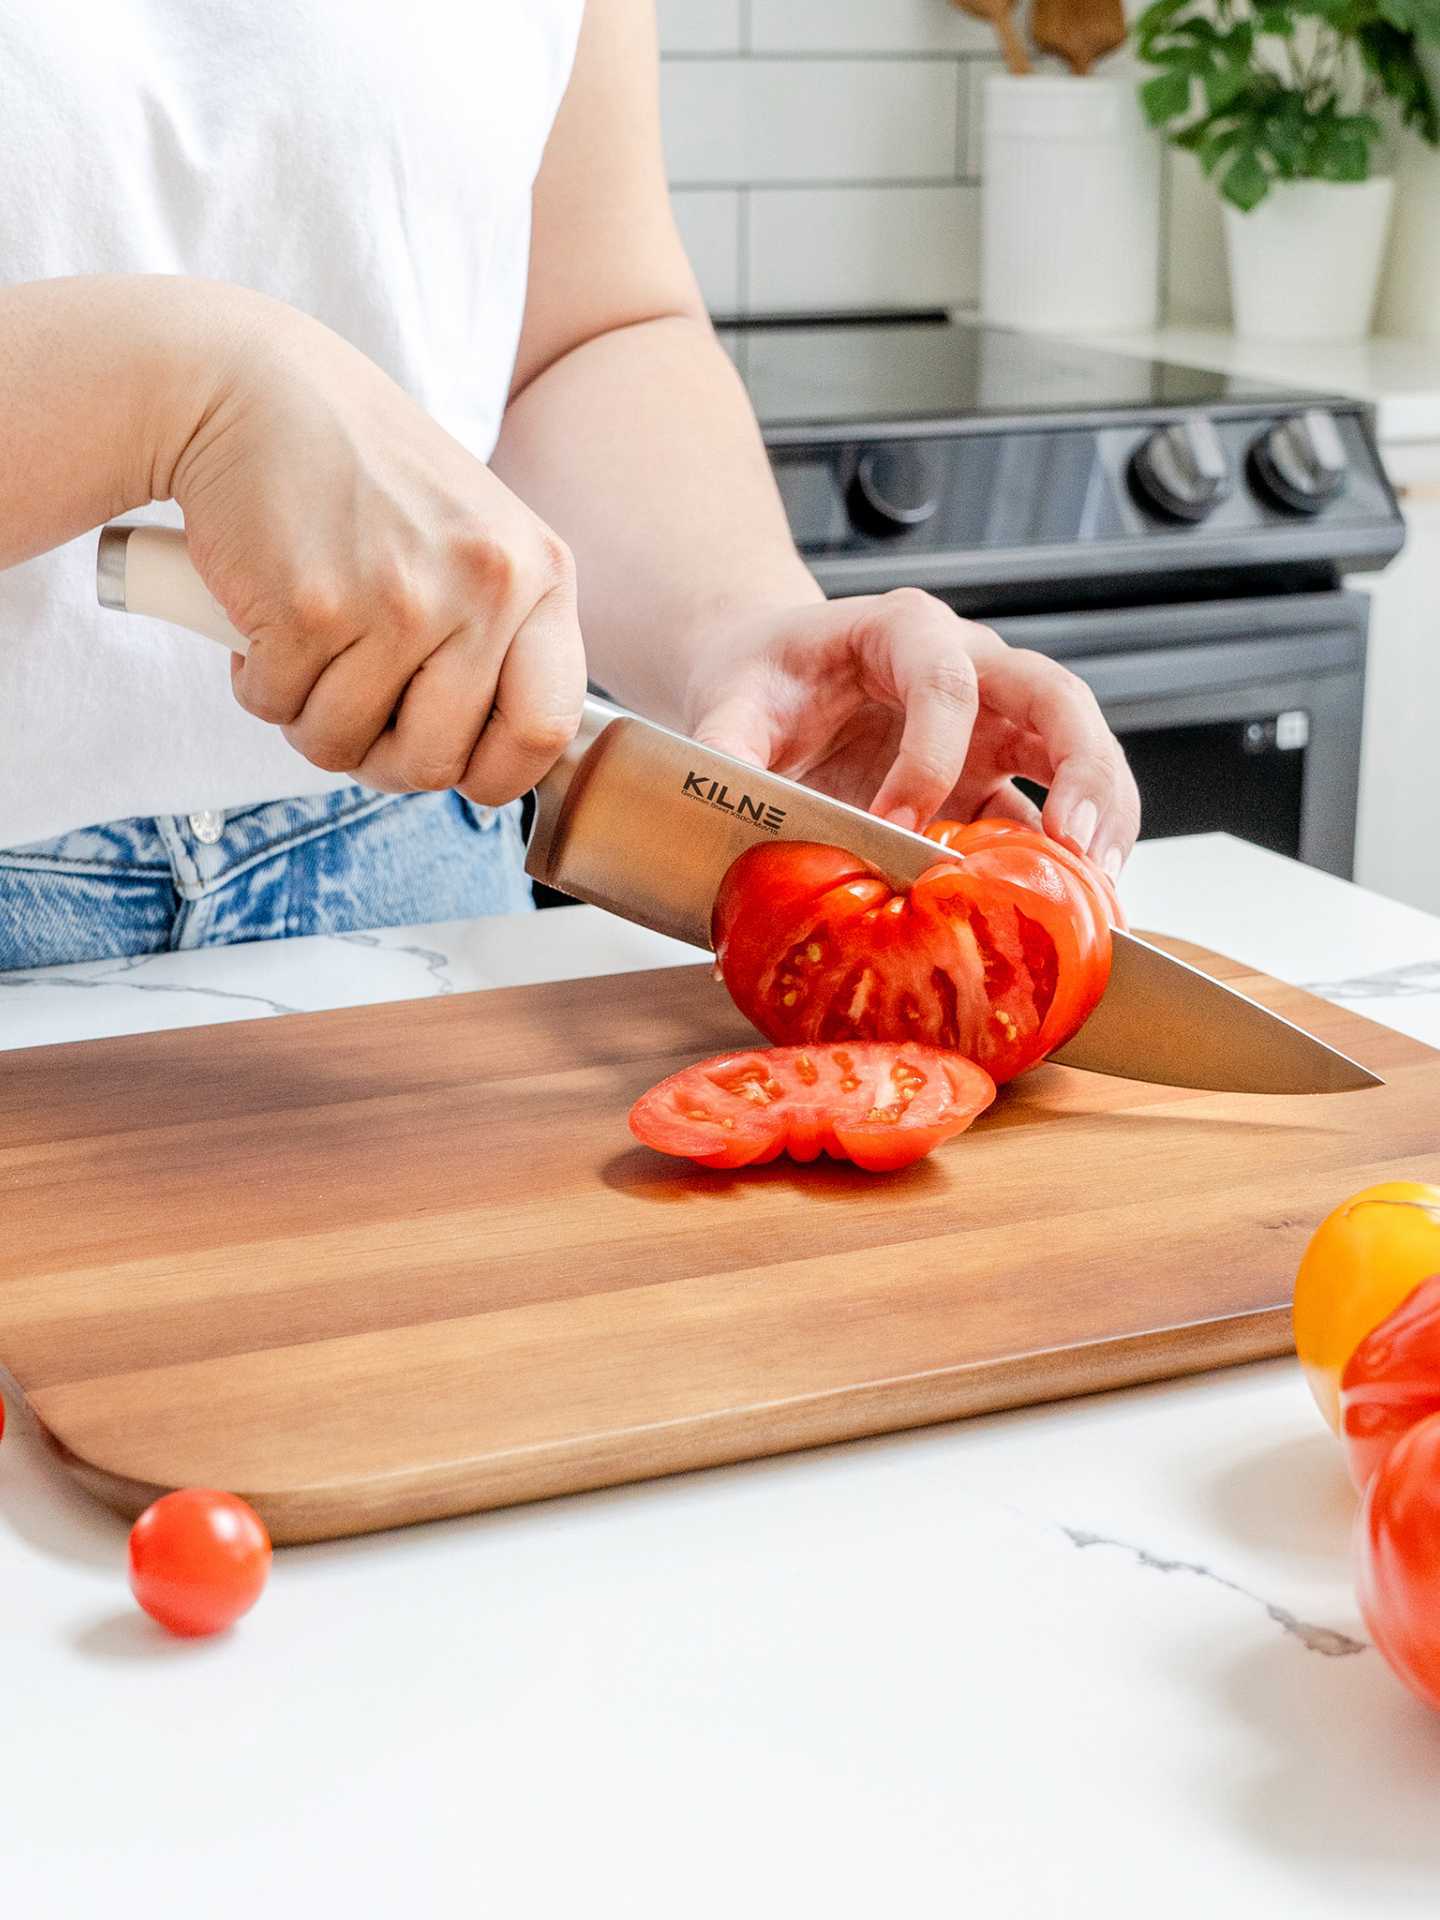 Kilne Ultimate Knife Set review | Person chopping a tomato on a cutting board with the Kilne Ultimate Knife Set chef's knife